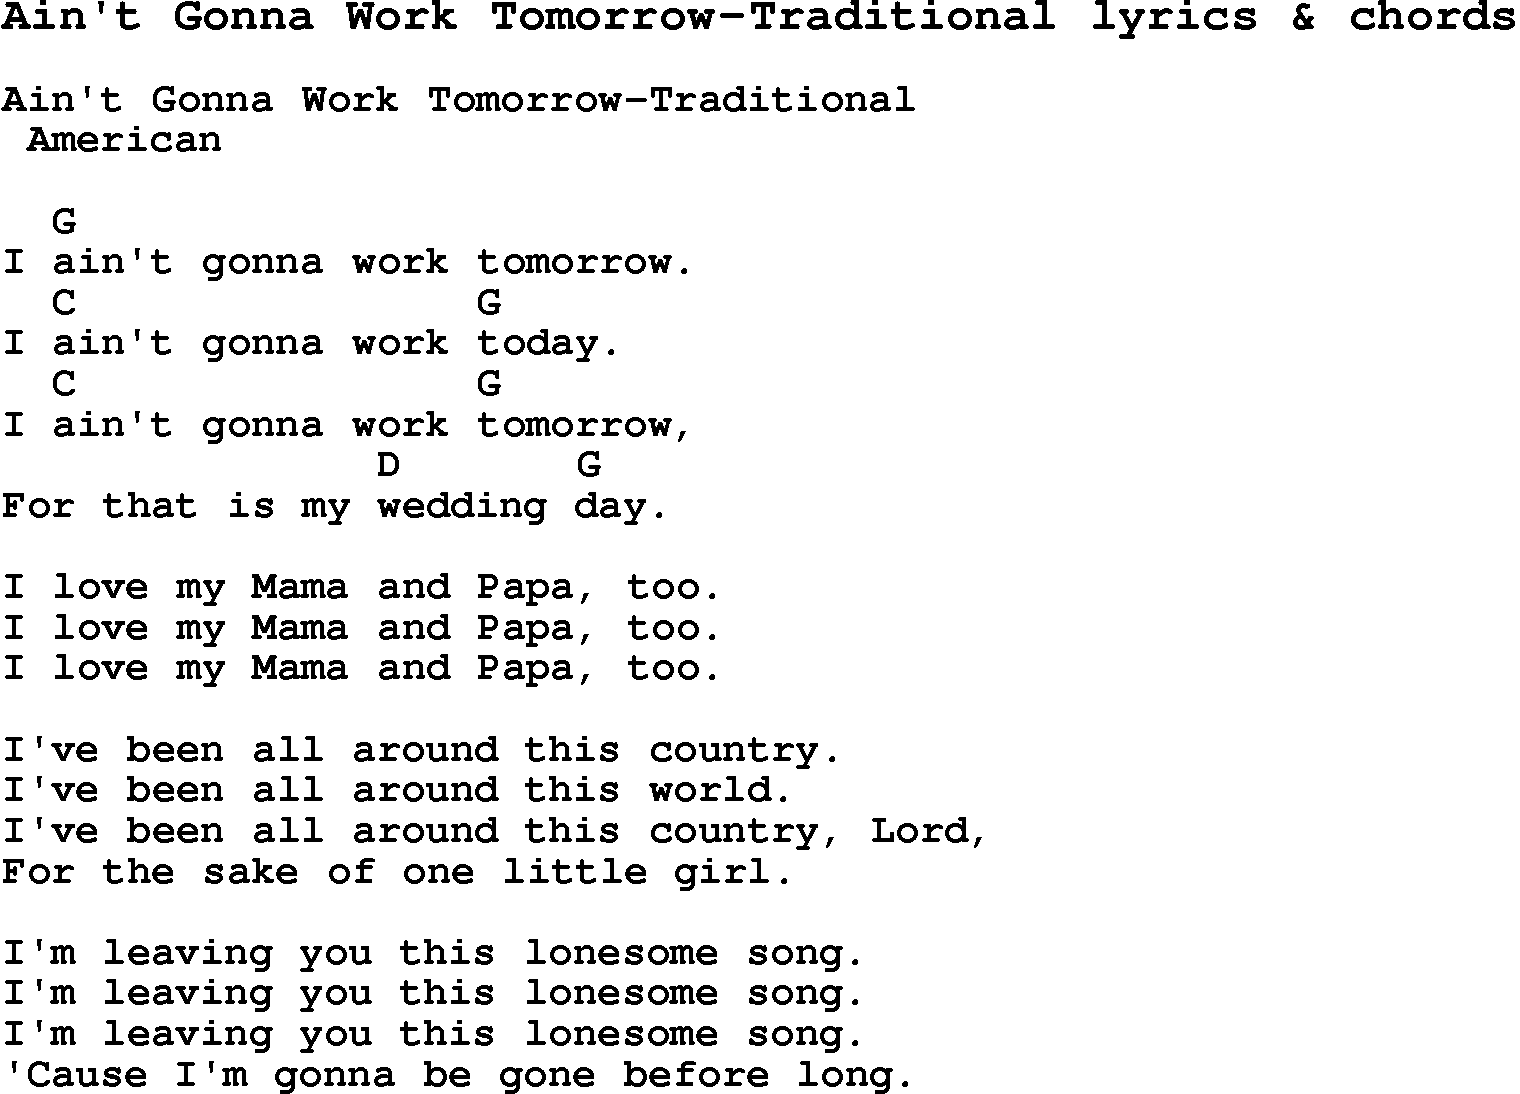 Love Song Lyrics for: Ain't Gonna Work Tomorrow-Traditional with chords for Ukulele, Guitar Banjo etc.